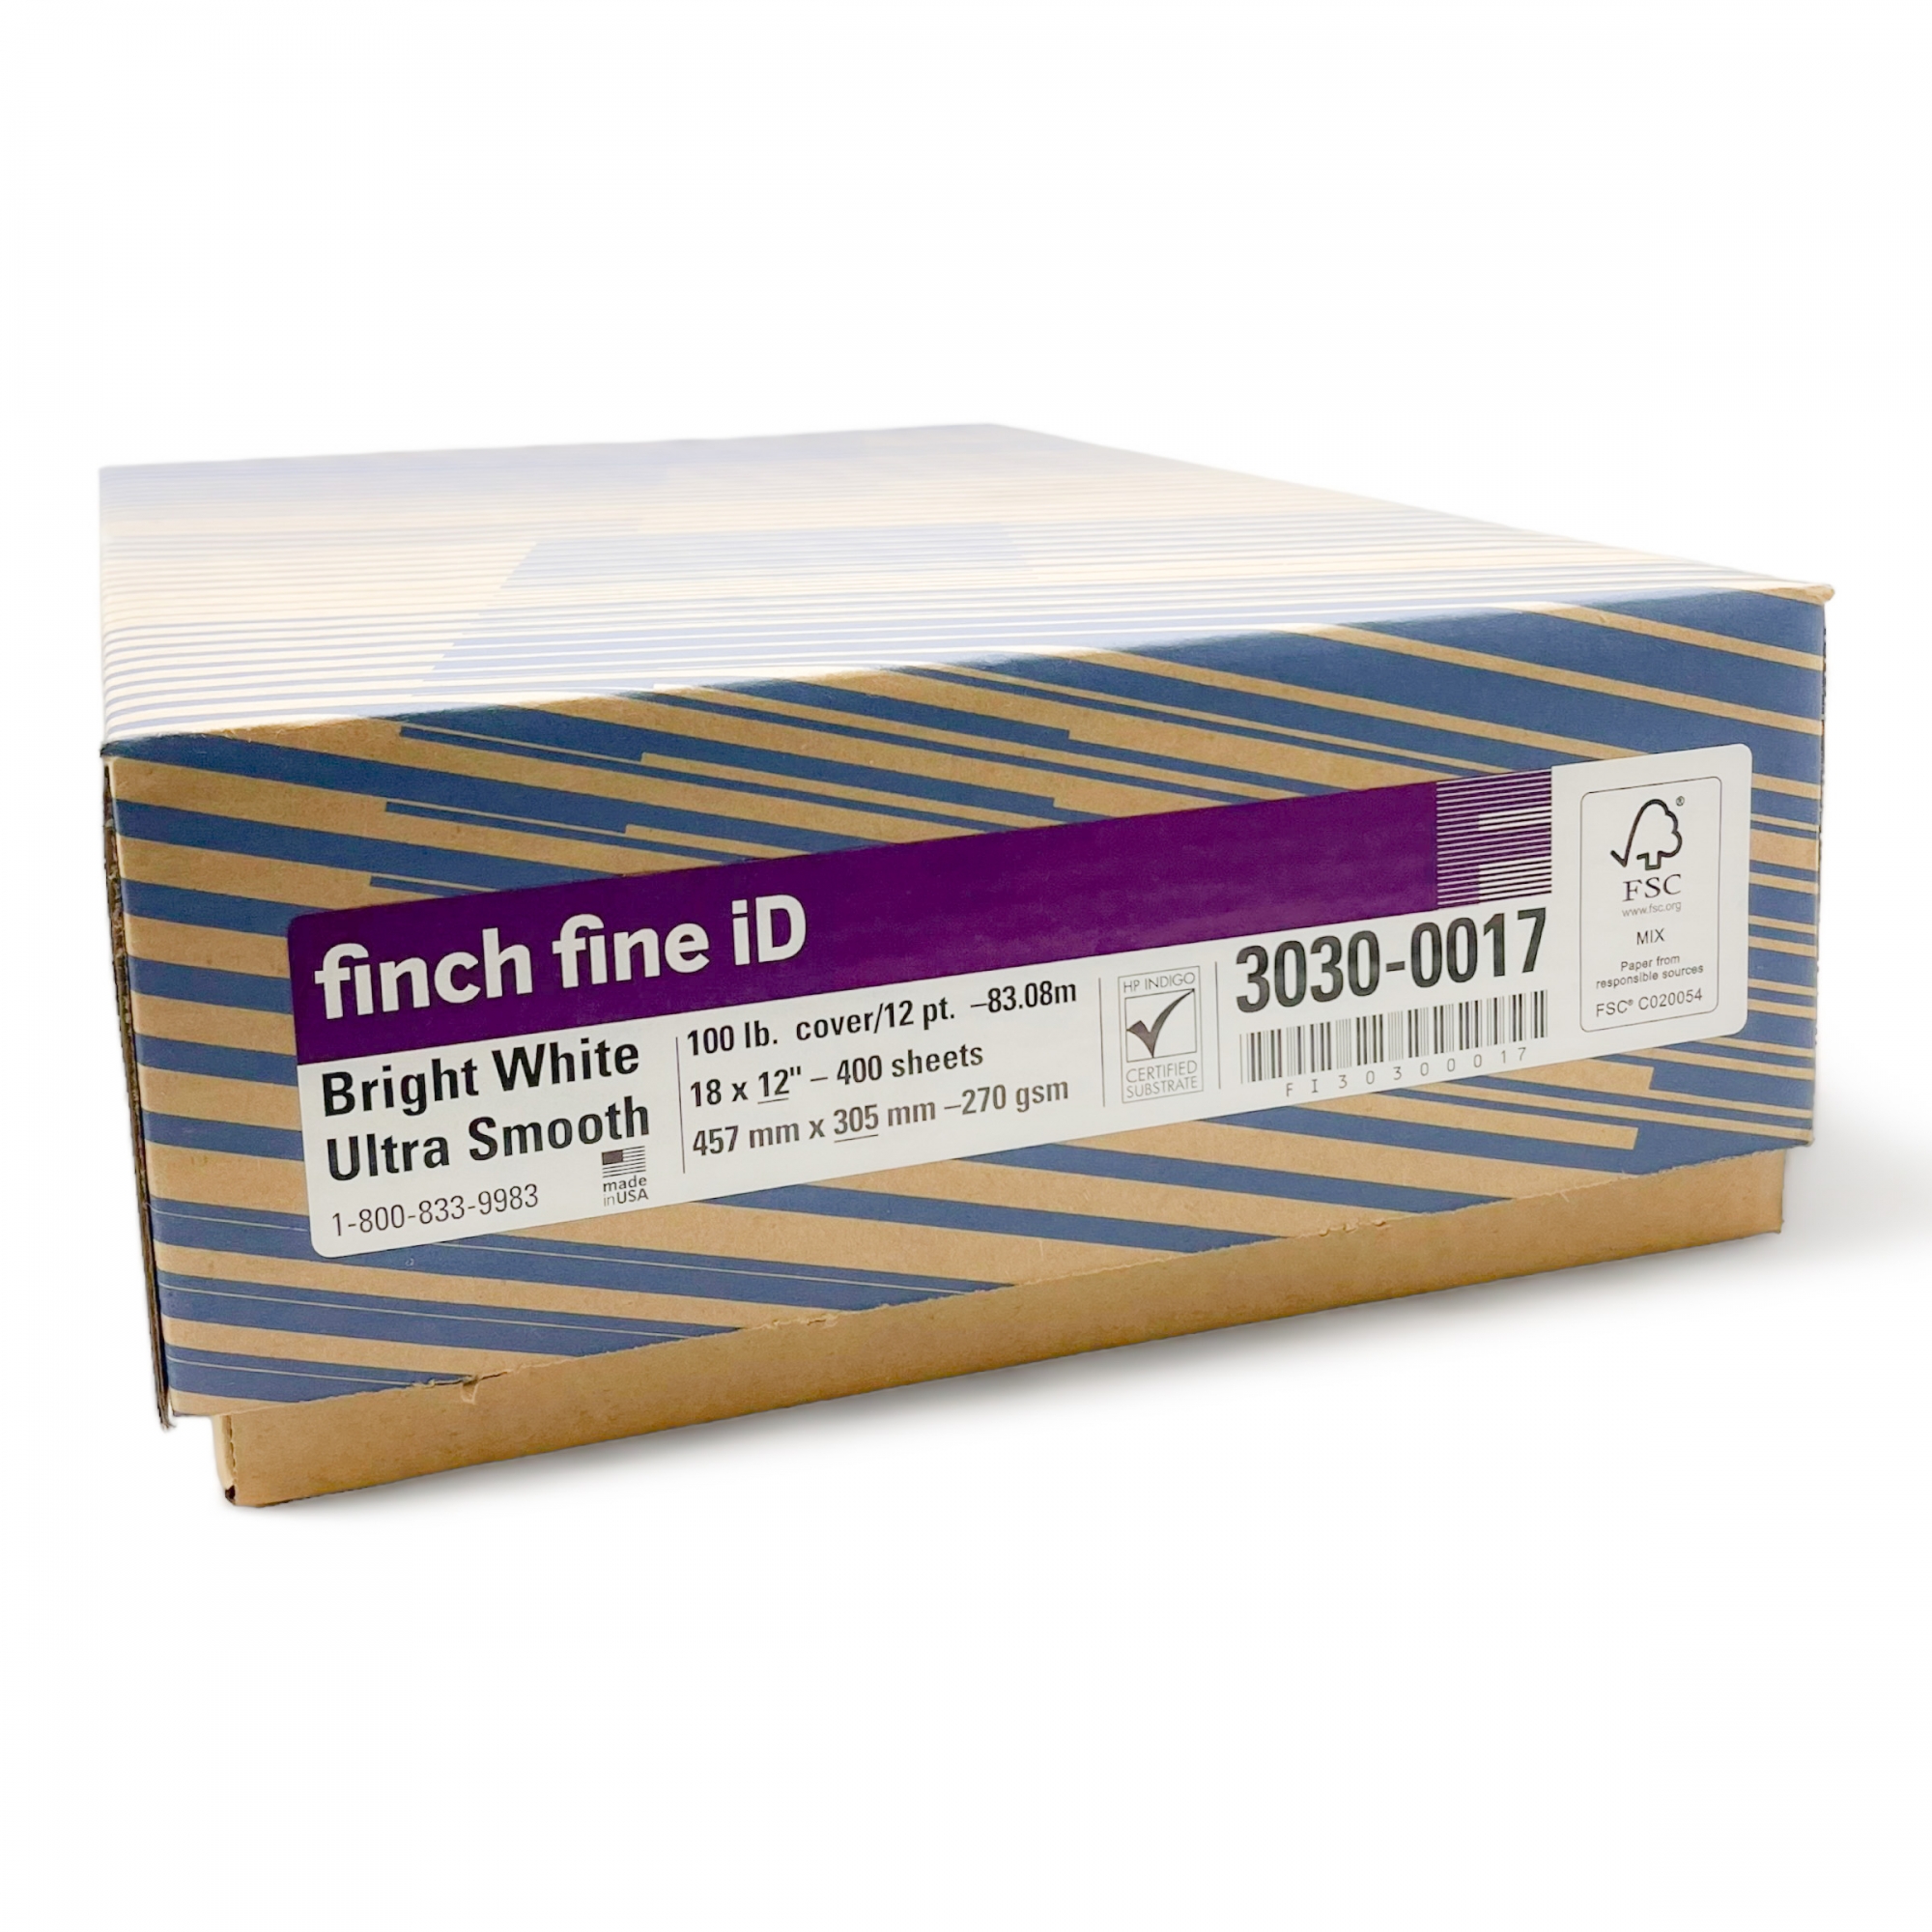 Finch Fine iD 18x12 100lb/271g Cardstock 400/case, Paper, Envelopes,  Cardstock & Wide format, Quick shipping nationwide